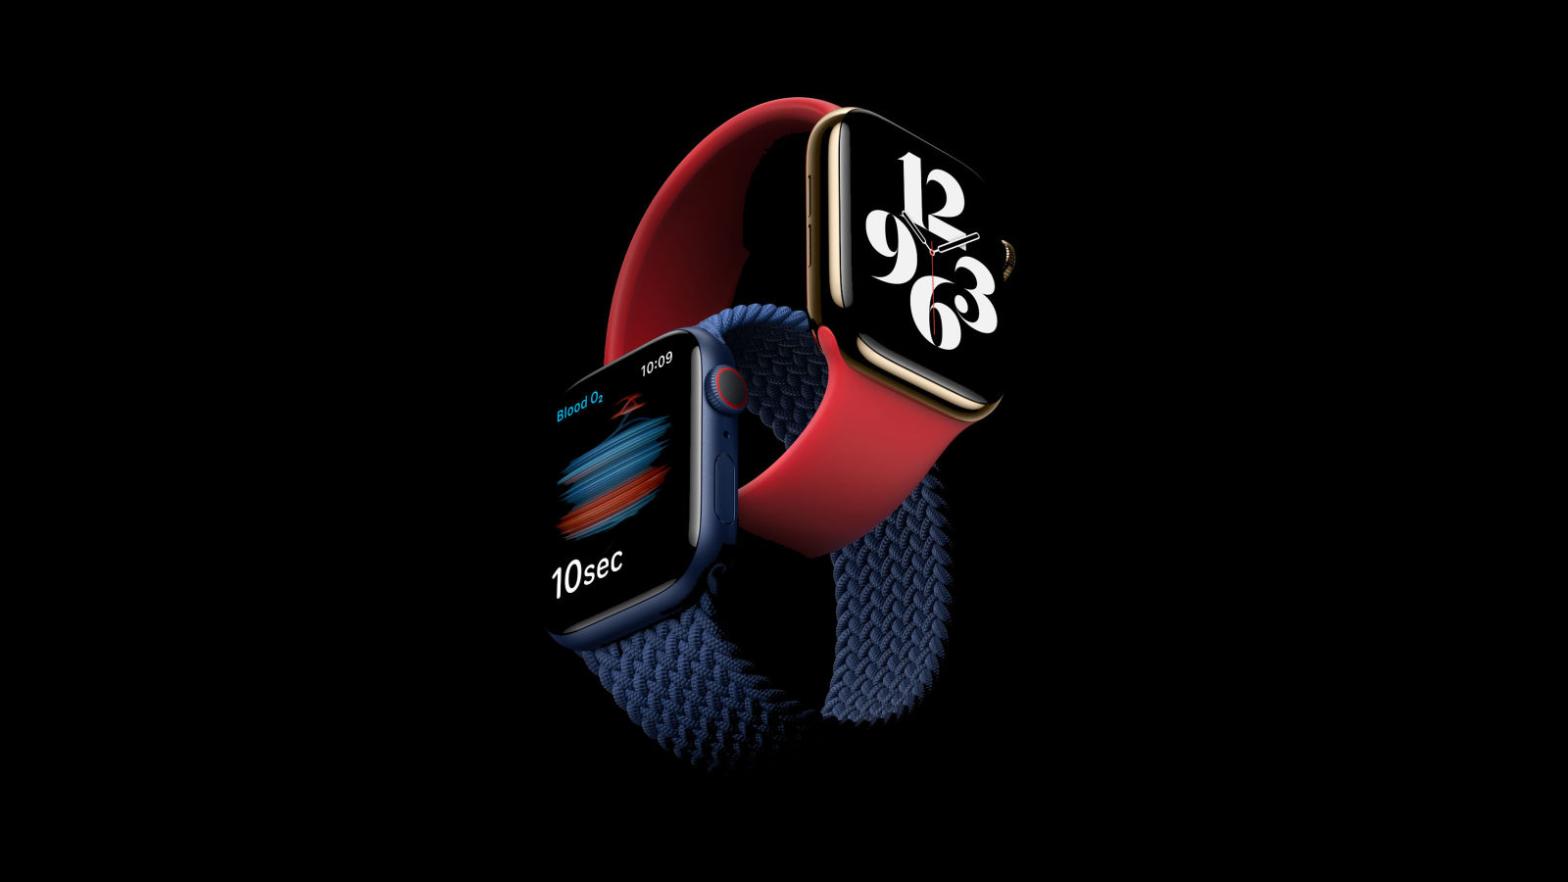 The Apple Watch Series 6 sure is pretty. (Image: Apple)